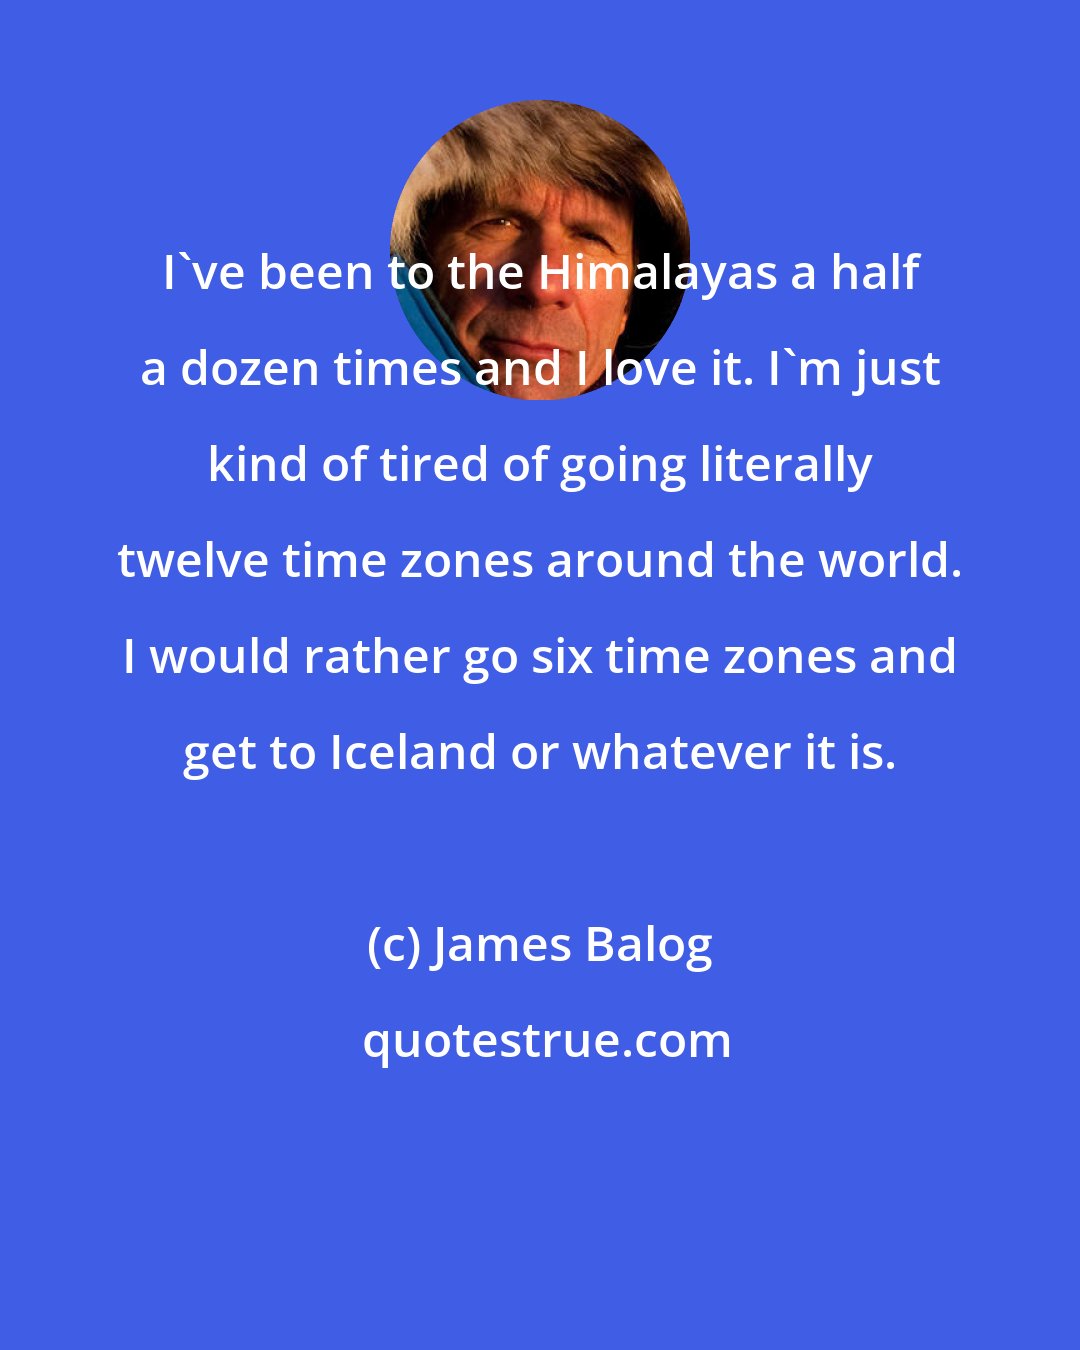 James Balog: I've been to the Himalayas a half a dozen times and I love it. I'm just kind of tired of going literally twelve time zones around the world. I would rather go six time zones and get to Iceland or whatever it is.